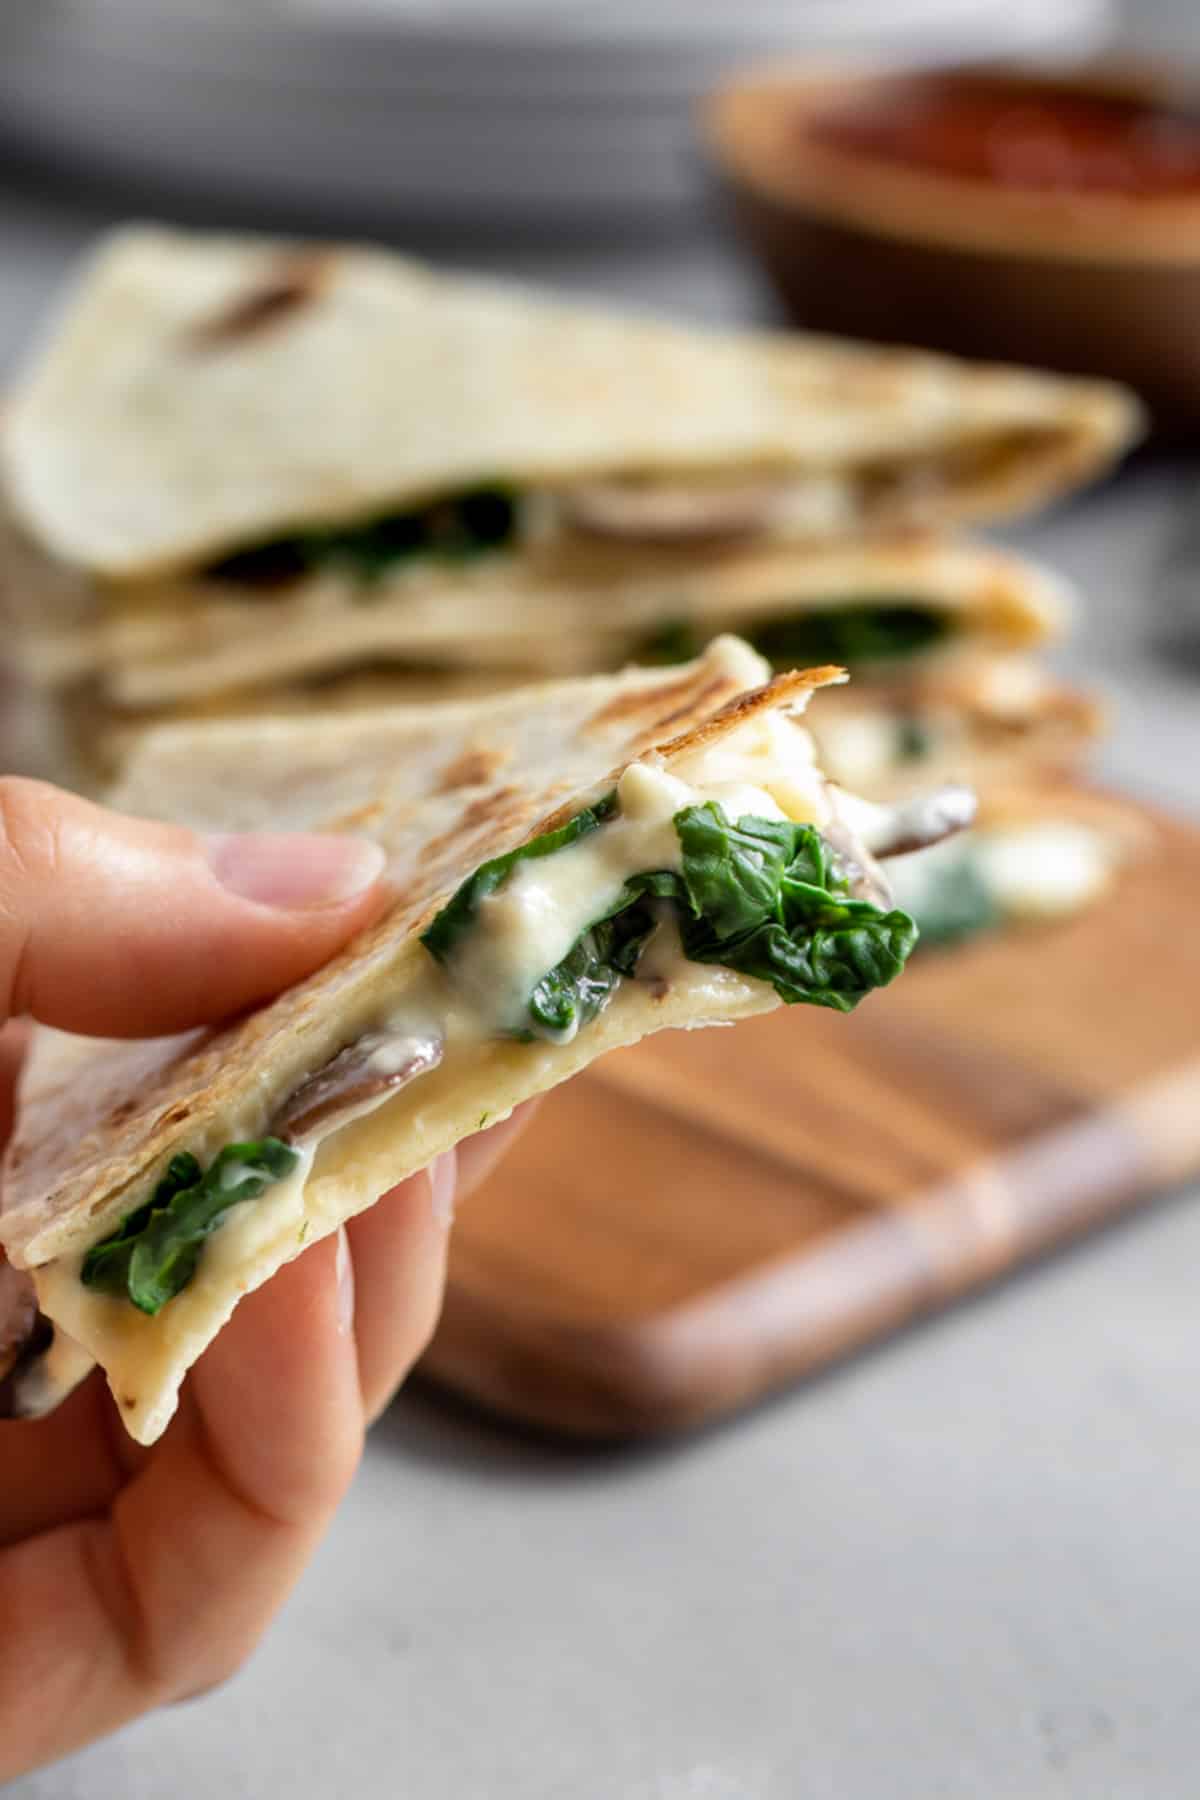 hand holding a triangle of vegan quesadilla showing the melted cheese and warm spinach.